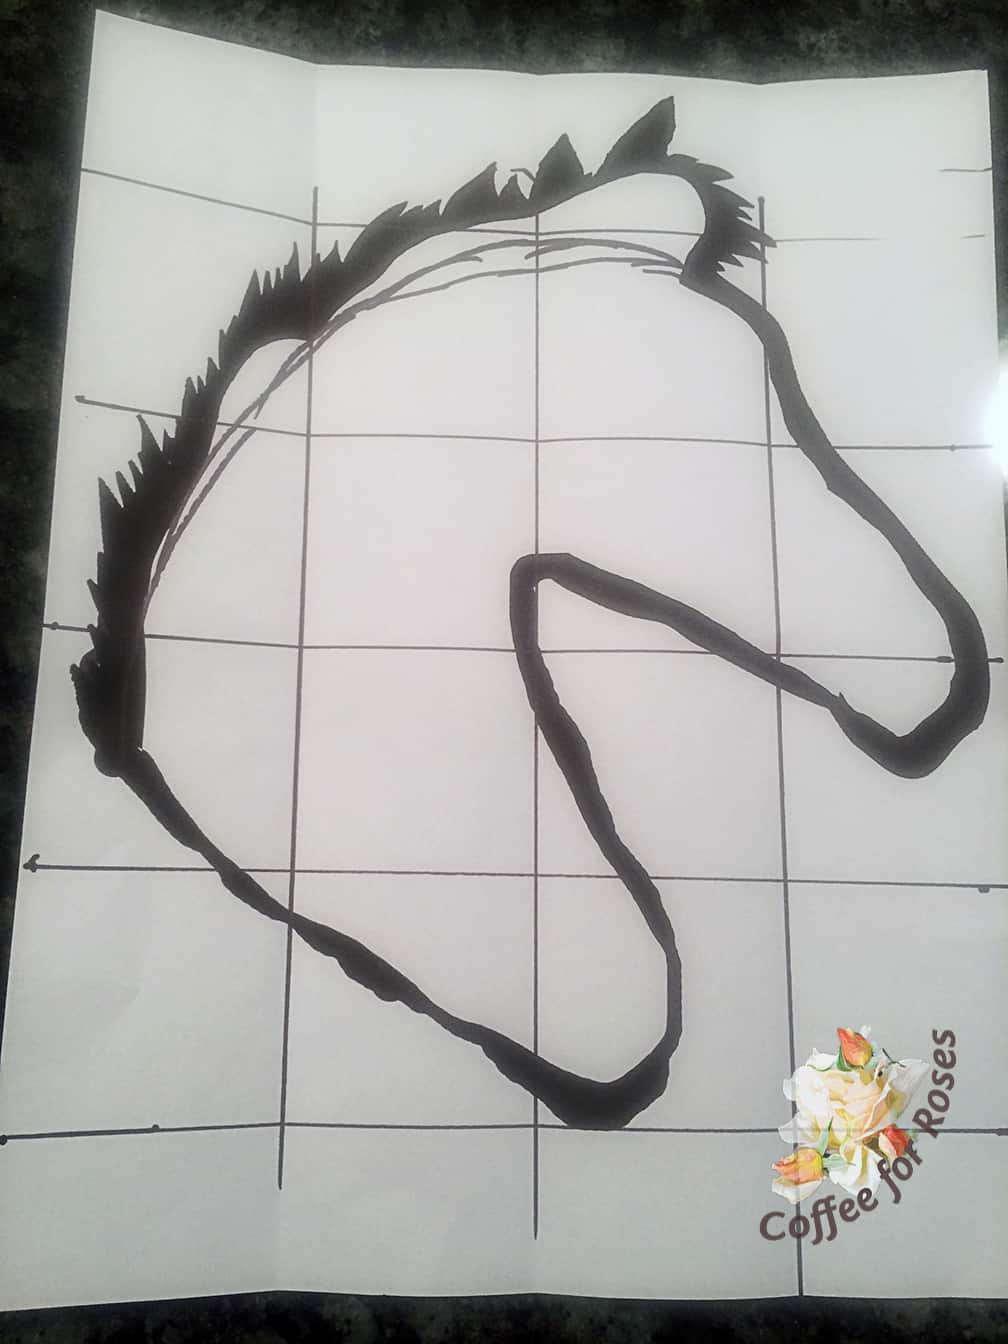 I downloaded an outline of a horse head from the internet. (Google "silhouette of horse head" or something similar.)